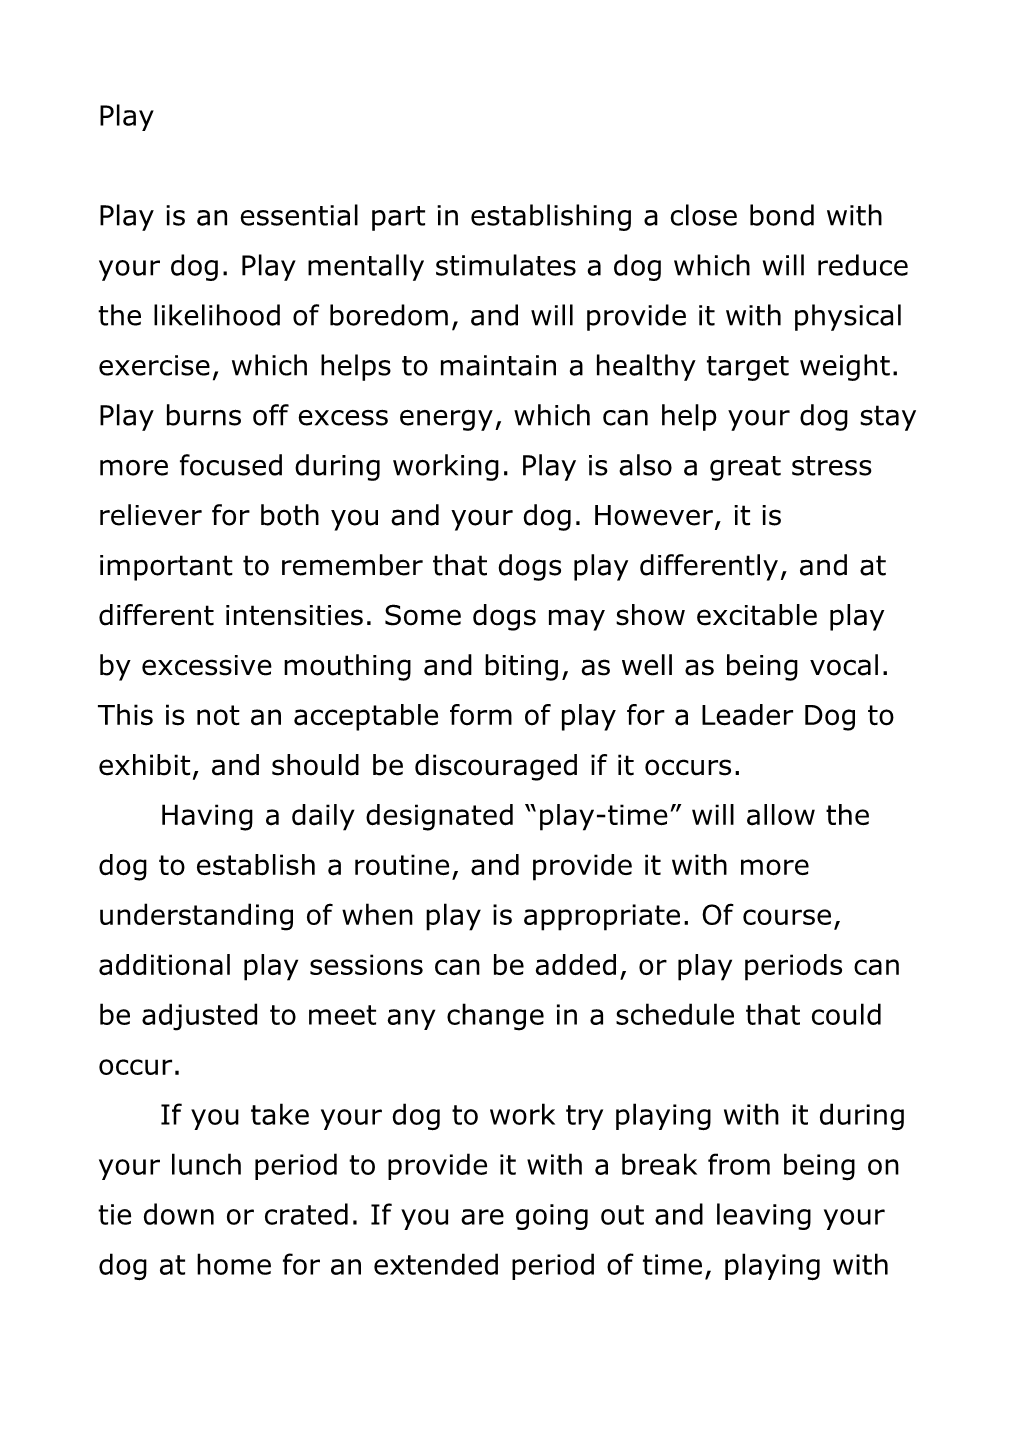 Guidelines for Feeding Your Leader Dog